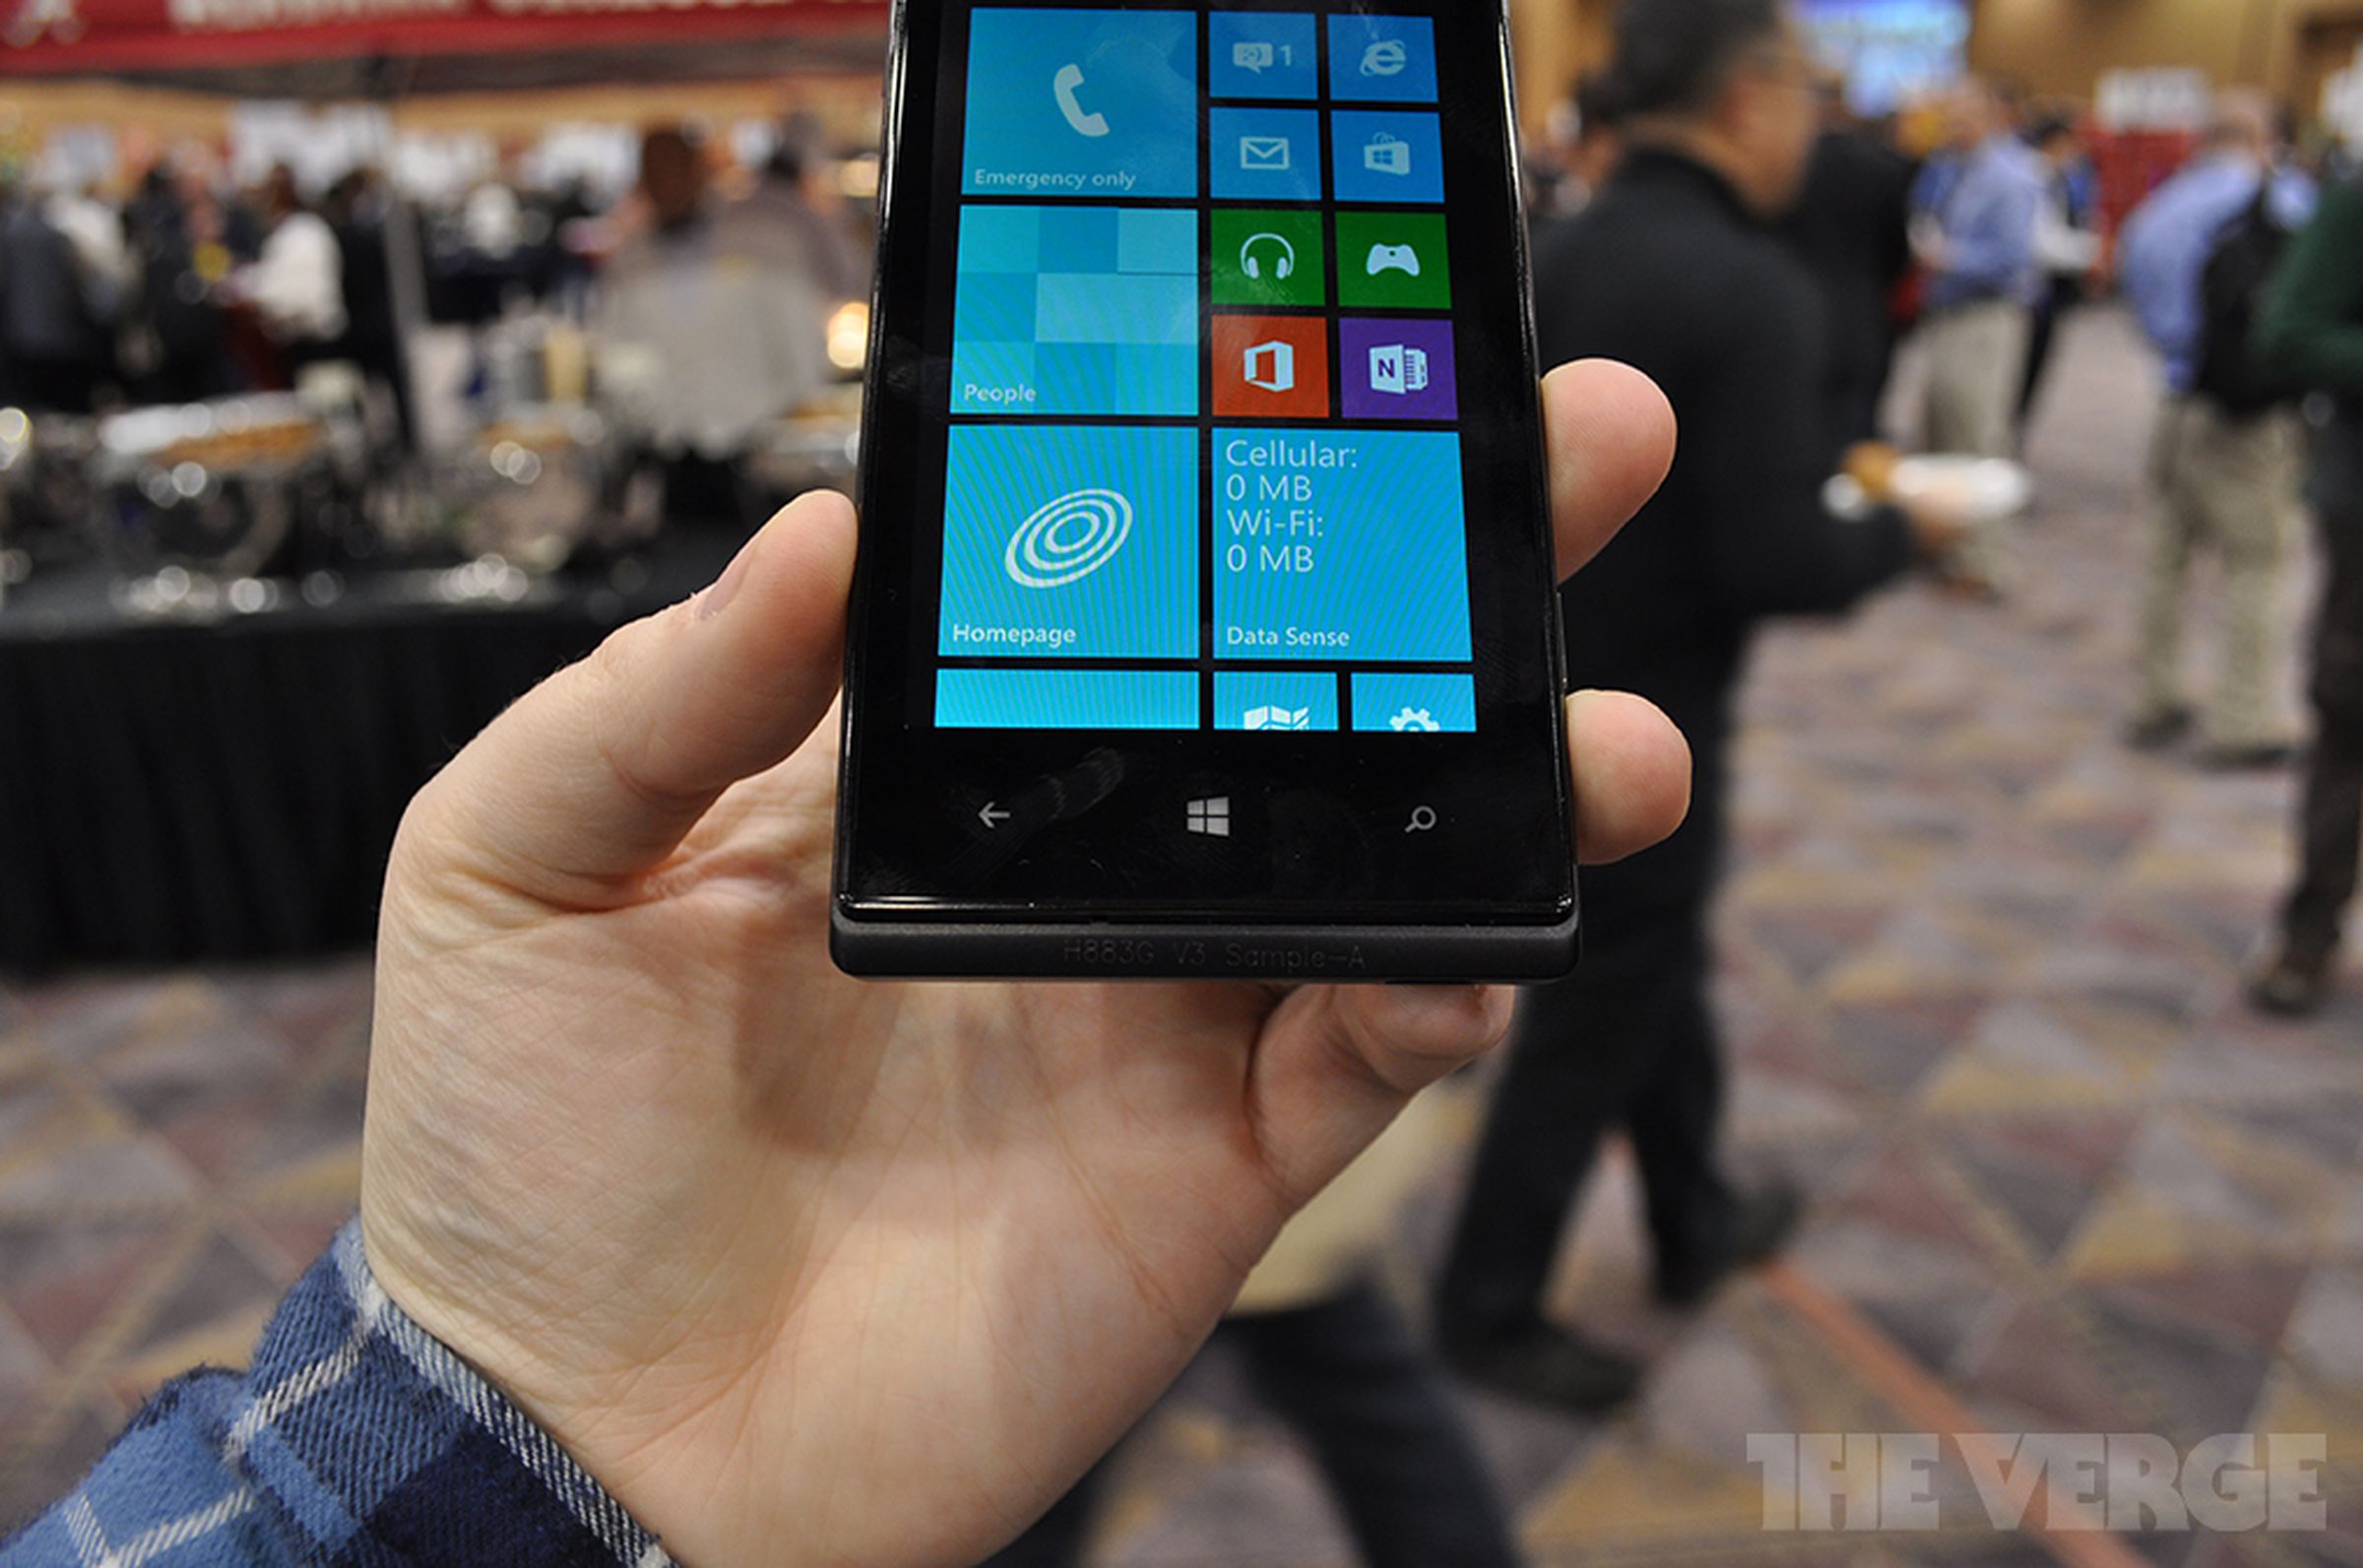 Huawei Ascend W1 Windows Phone 8 hands-on pictures